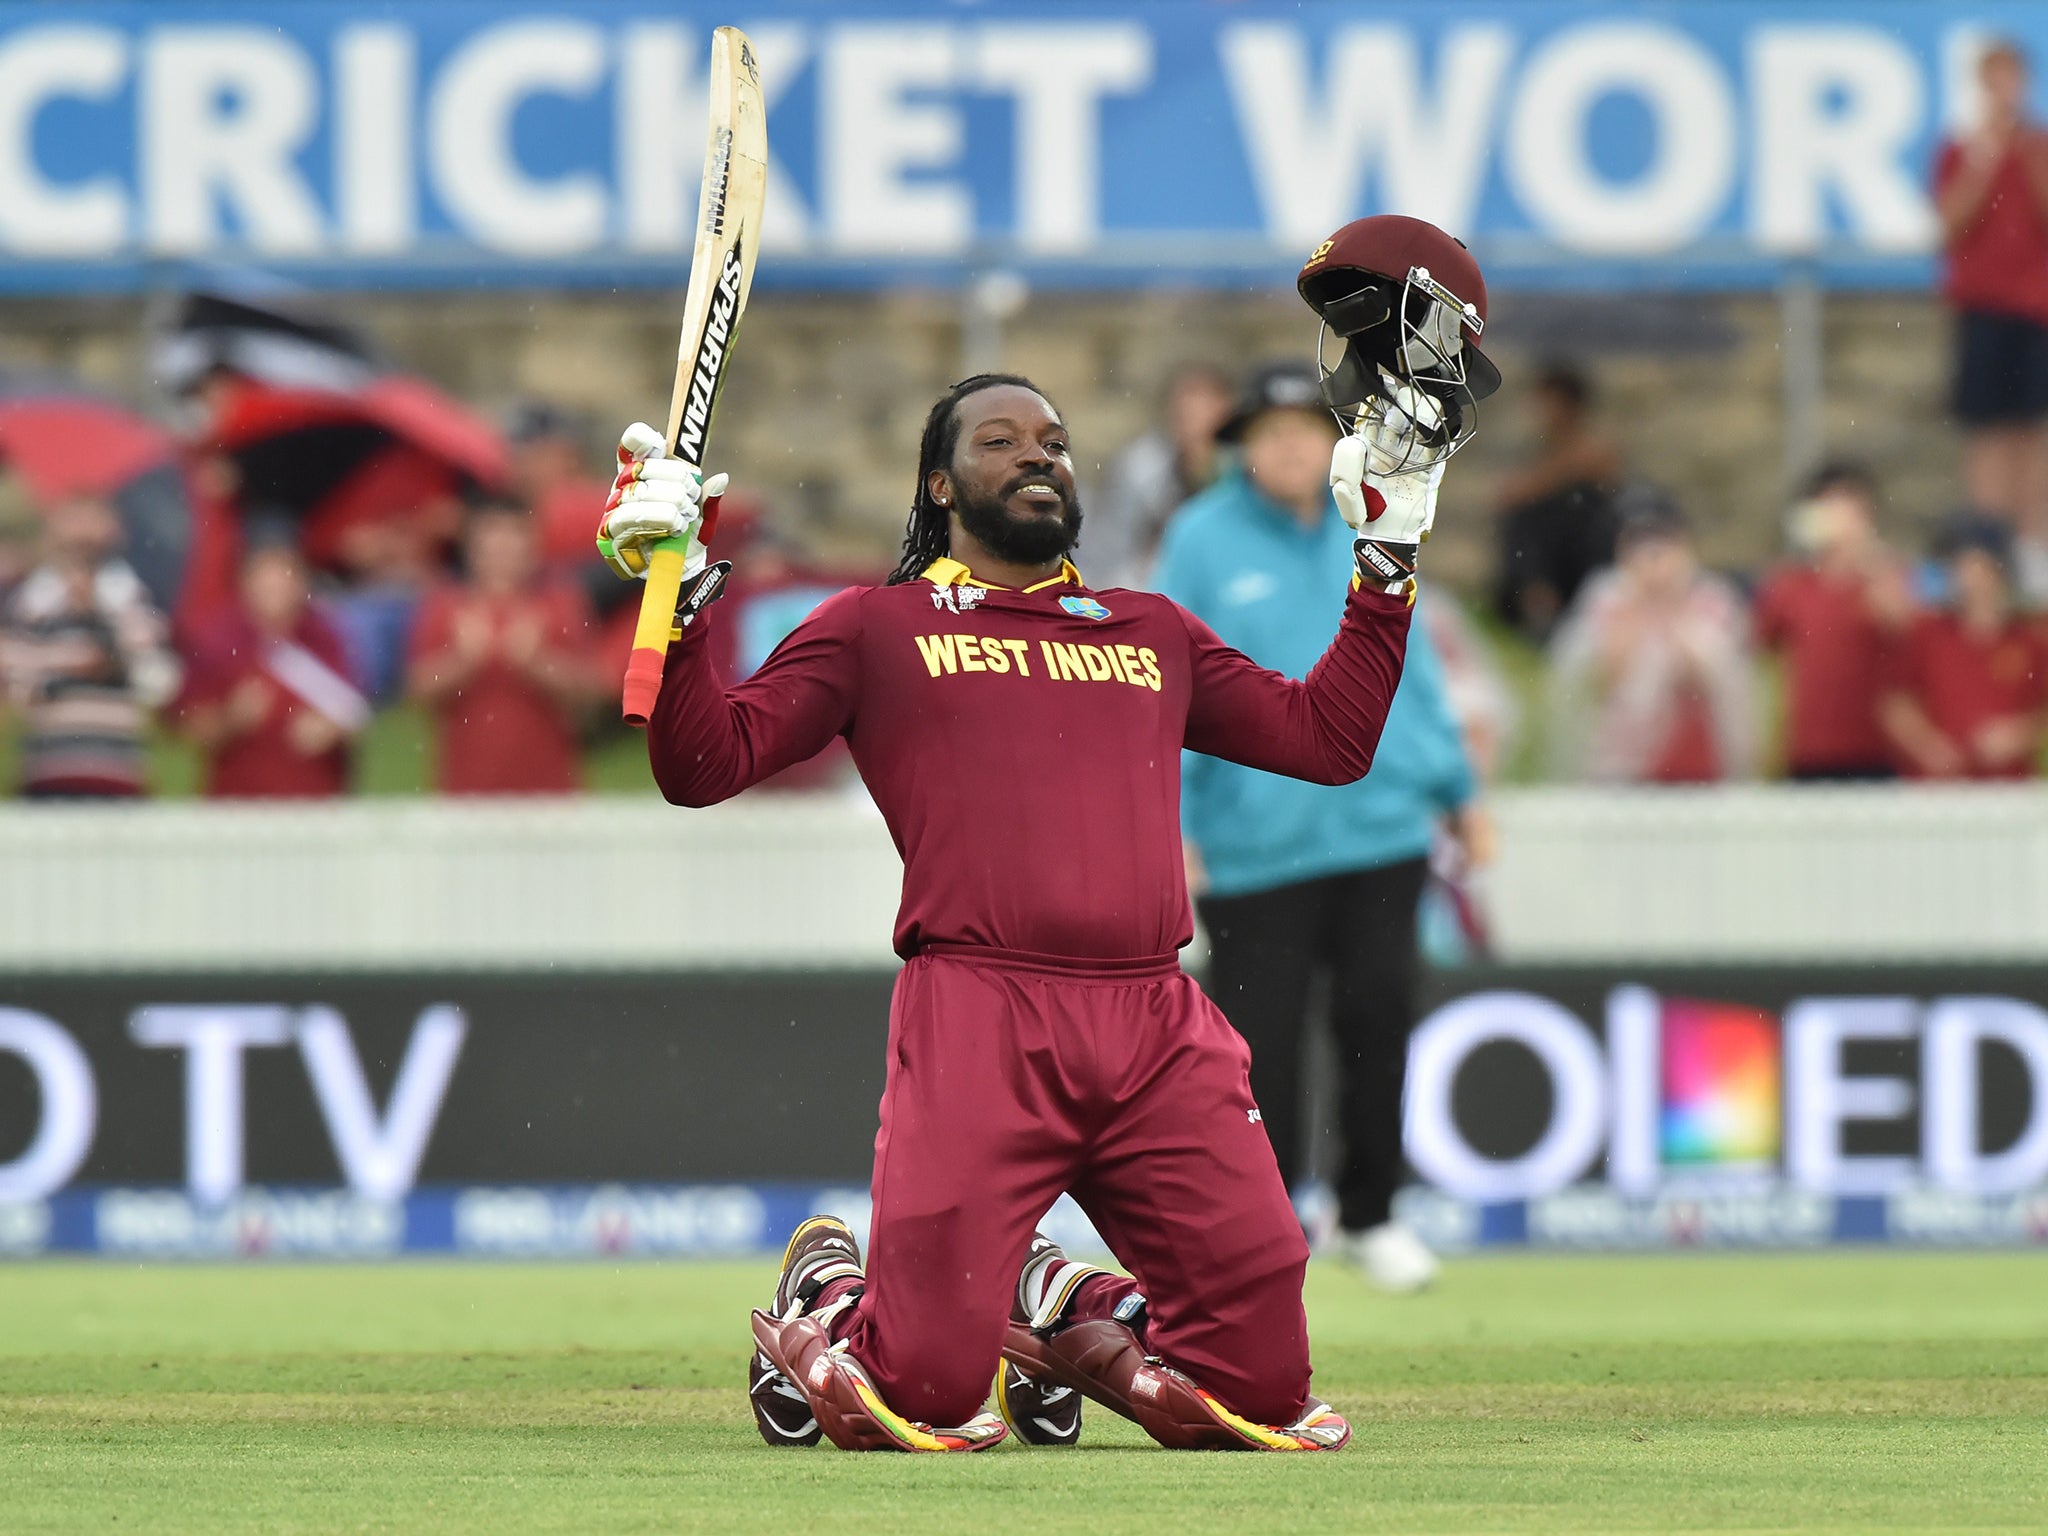 Chris Gayle celebrates after reaching his double century